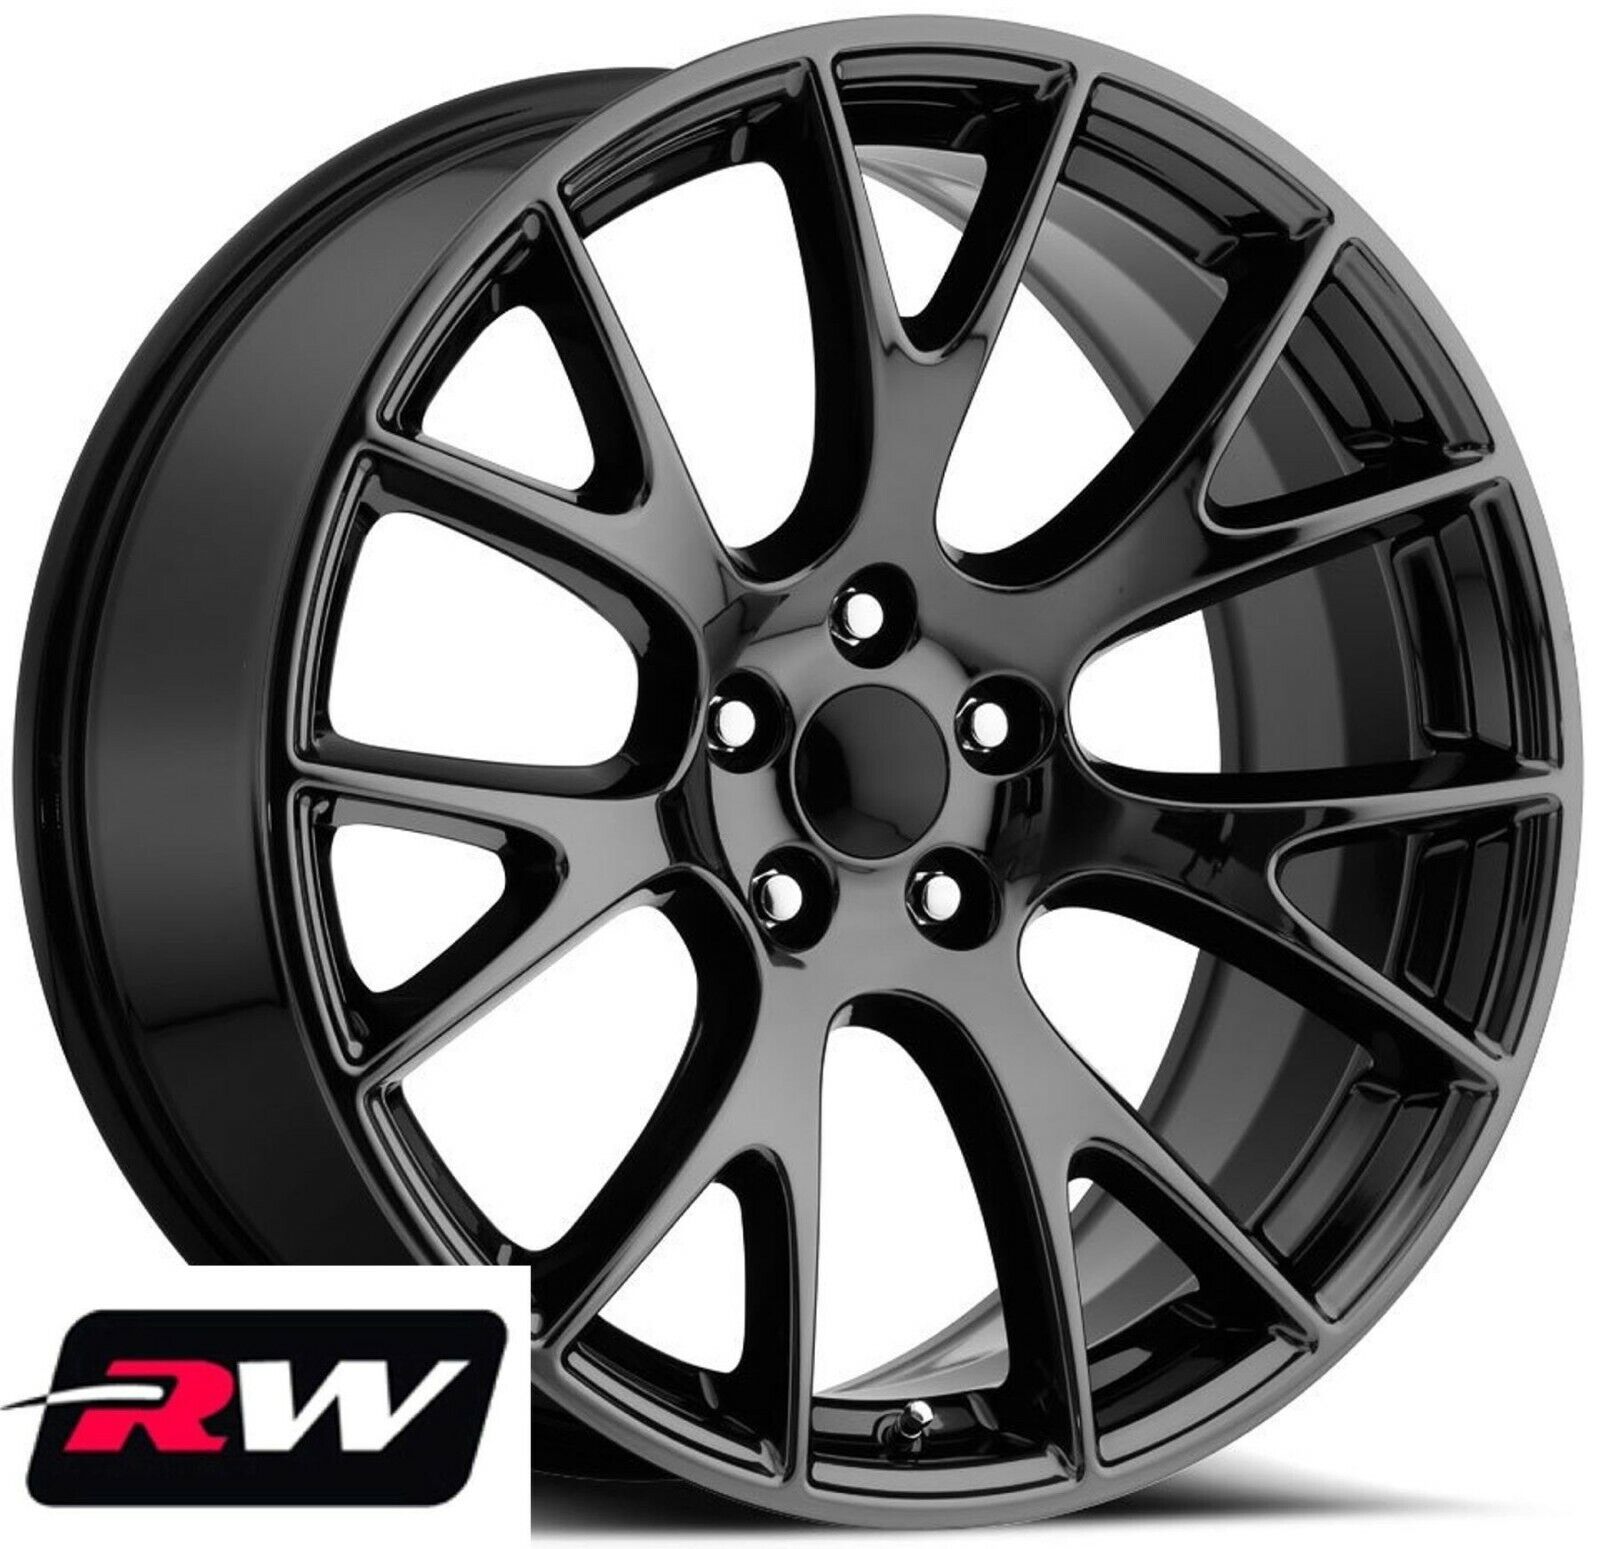 20x9.5 / 20x10.5 RW 2528 Wheels for Dodge Charger Gloss Black Staggered Rims